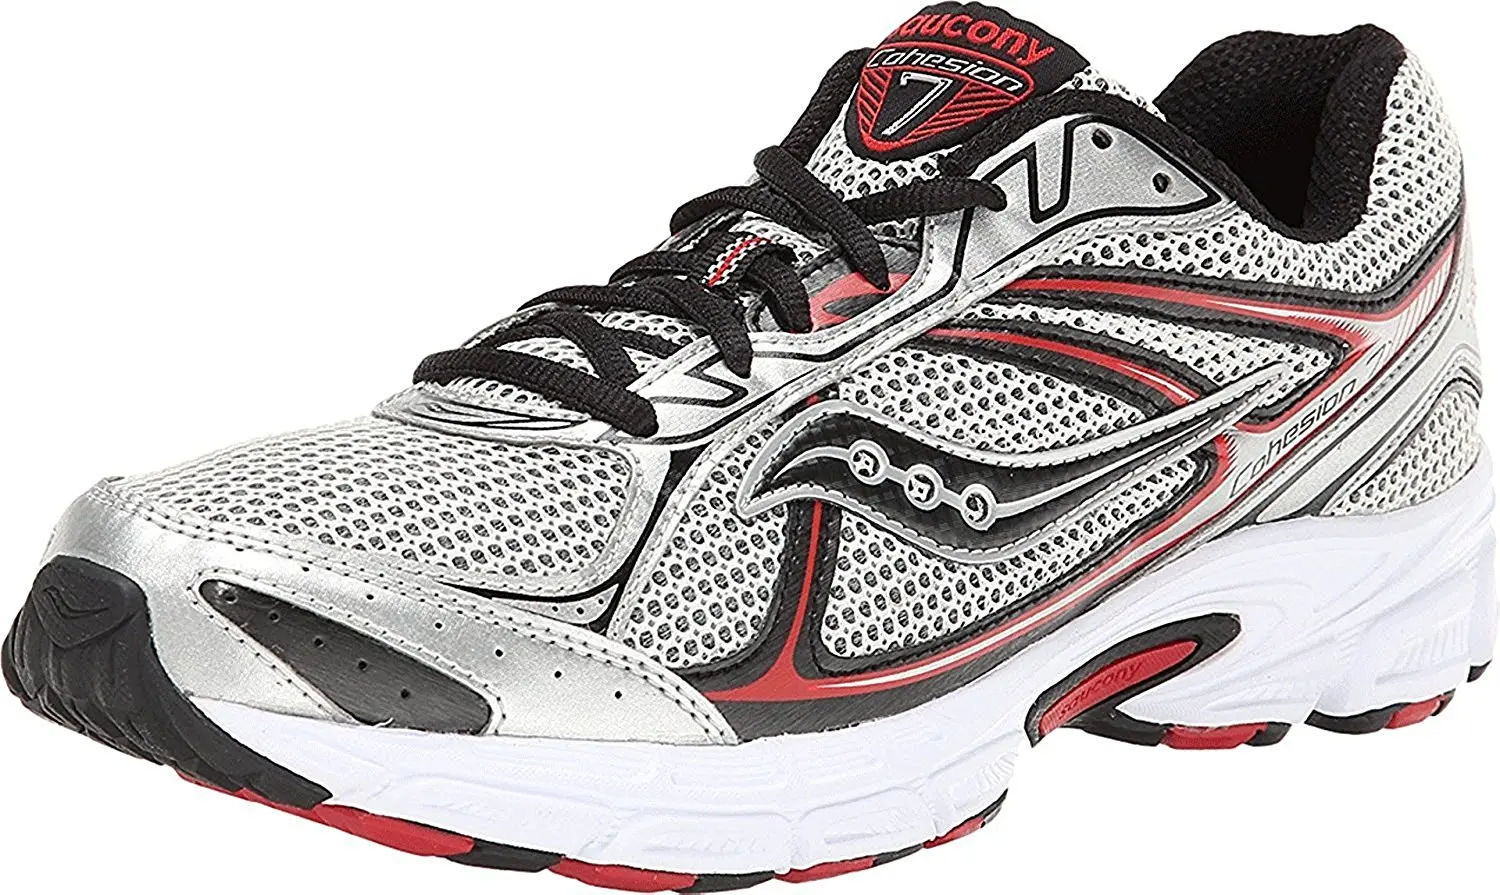 Grid Cohesion 7 Athletic Running Shoes 